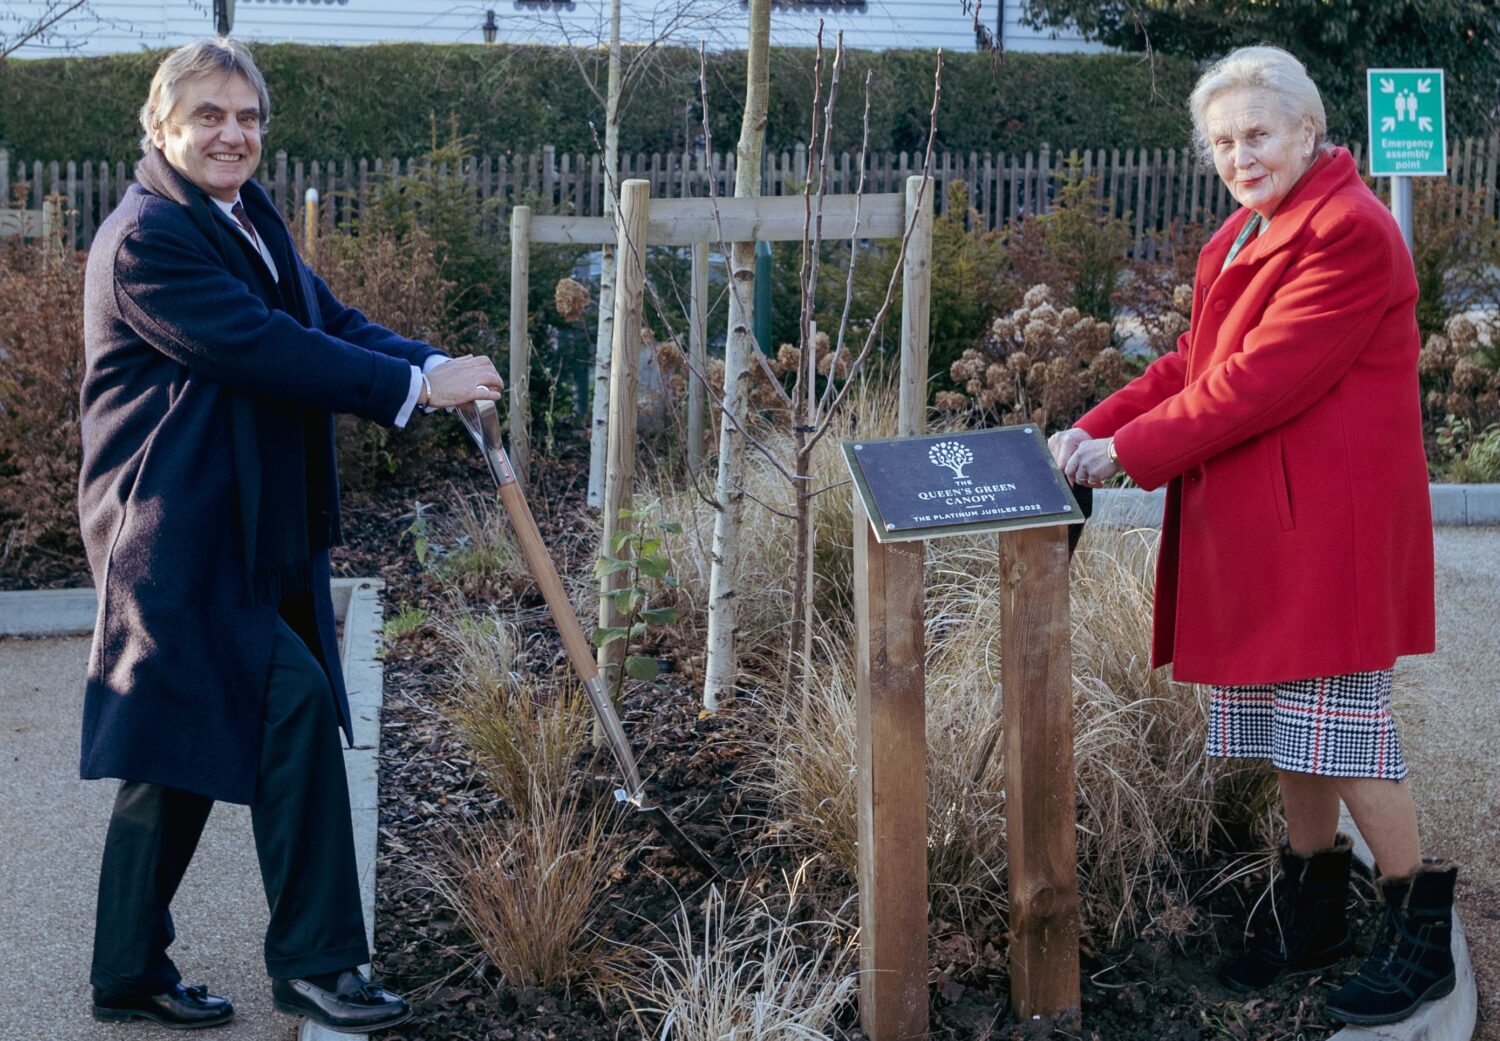 Marquess with Hospice supporter Sonia Burt at tree planting Cottage Hospice